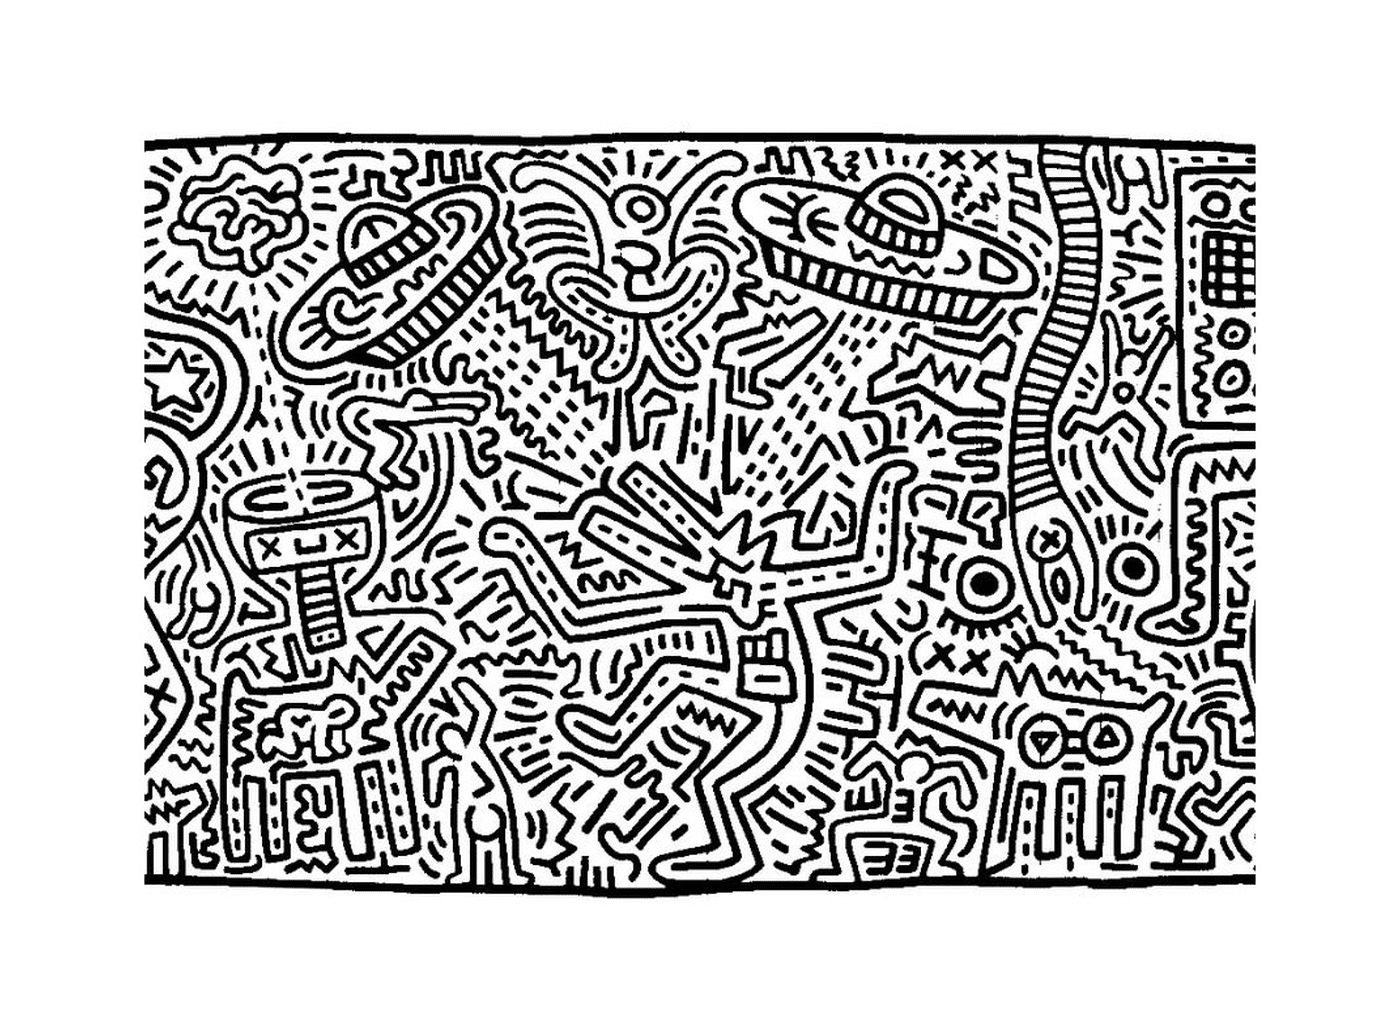  a work of art by Keith Haring 